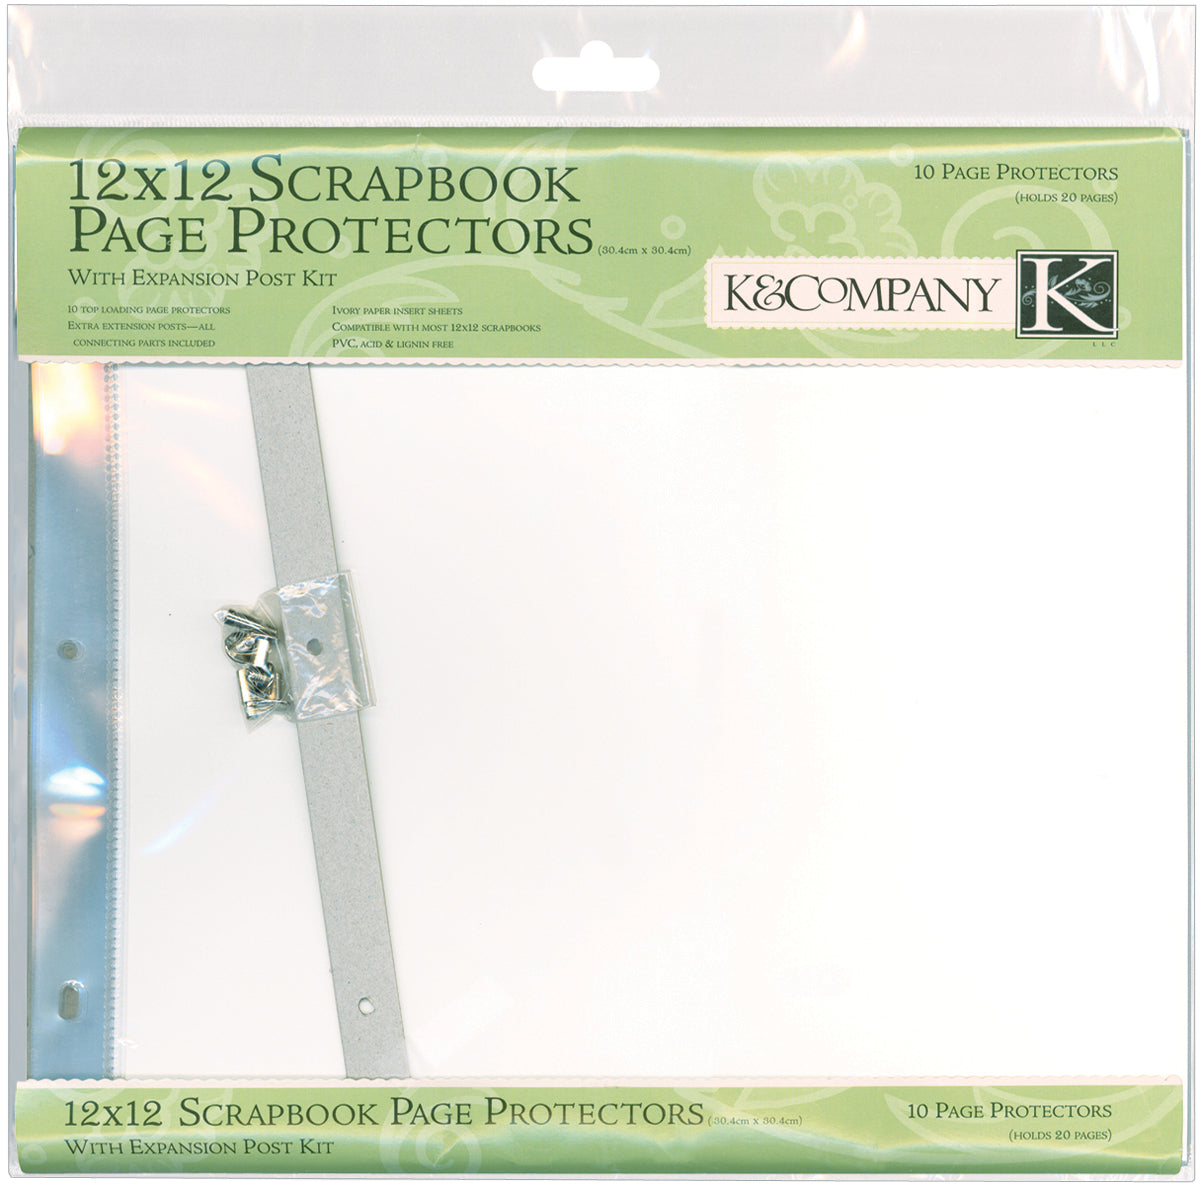 49 and Market Foundations Page Protectors 6X8 12/Pkg Everyday Basics